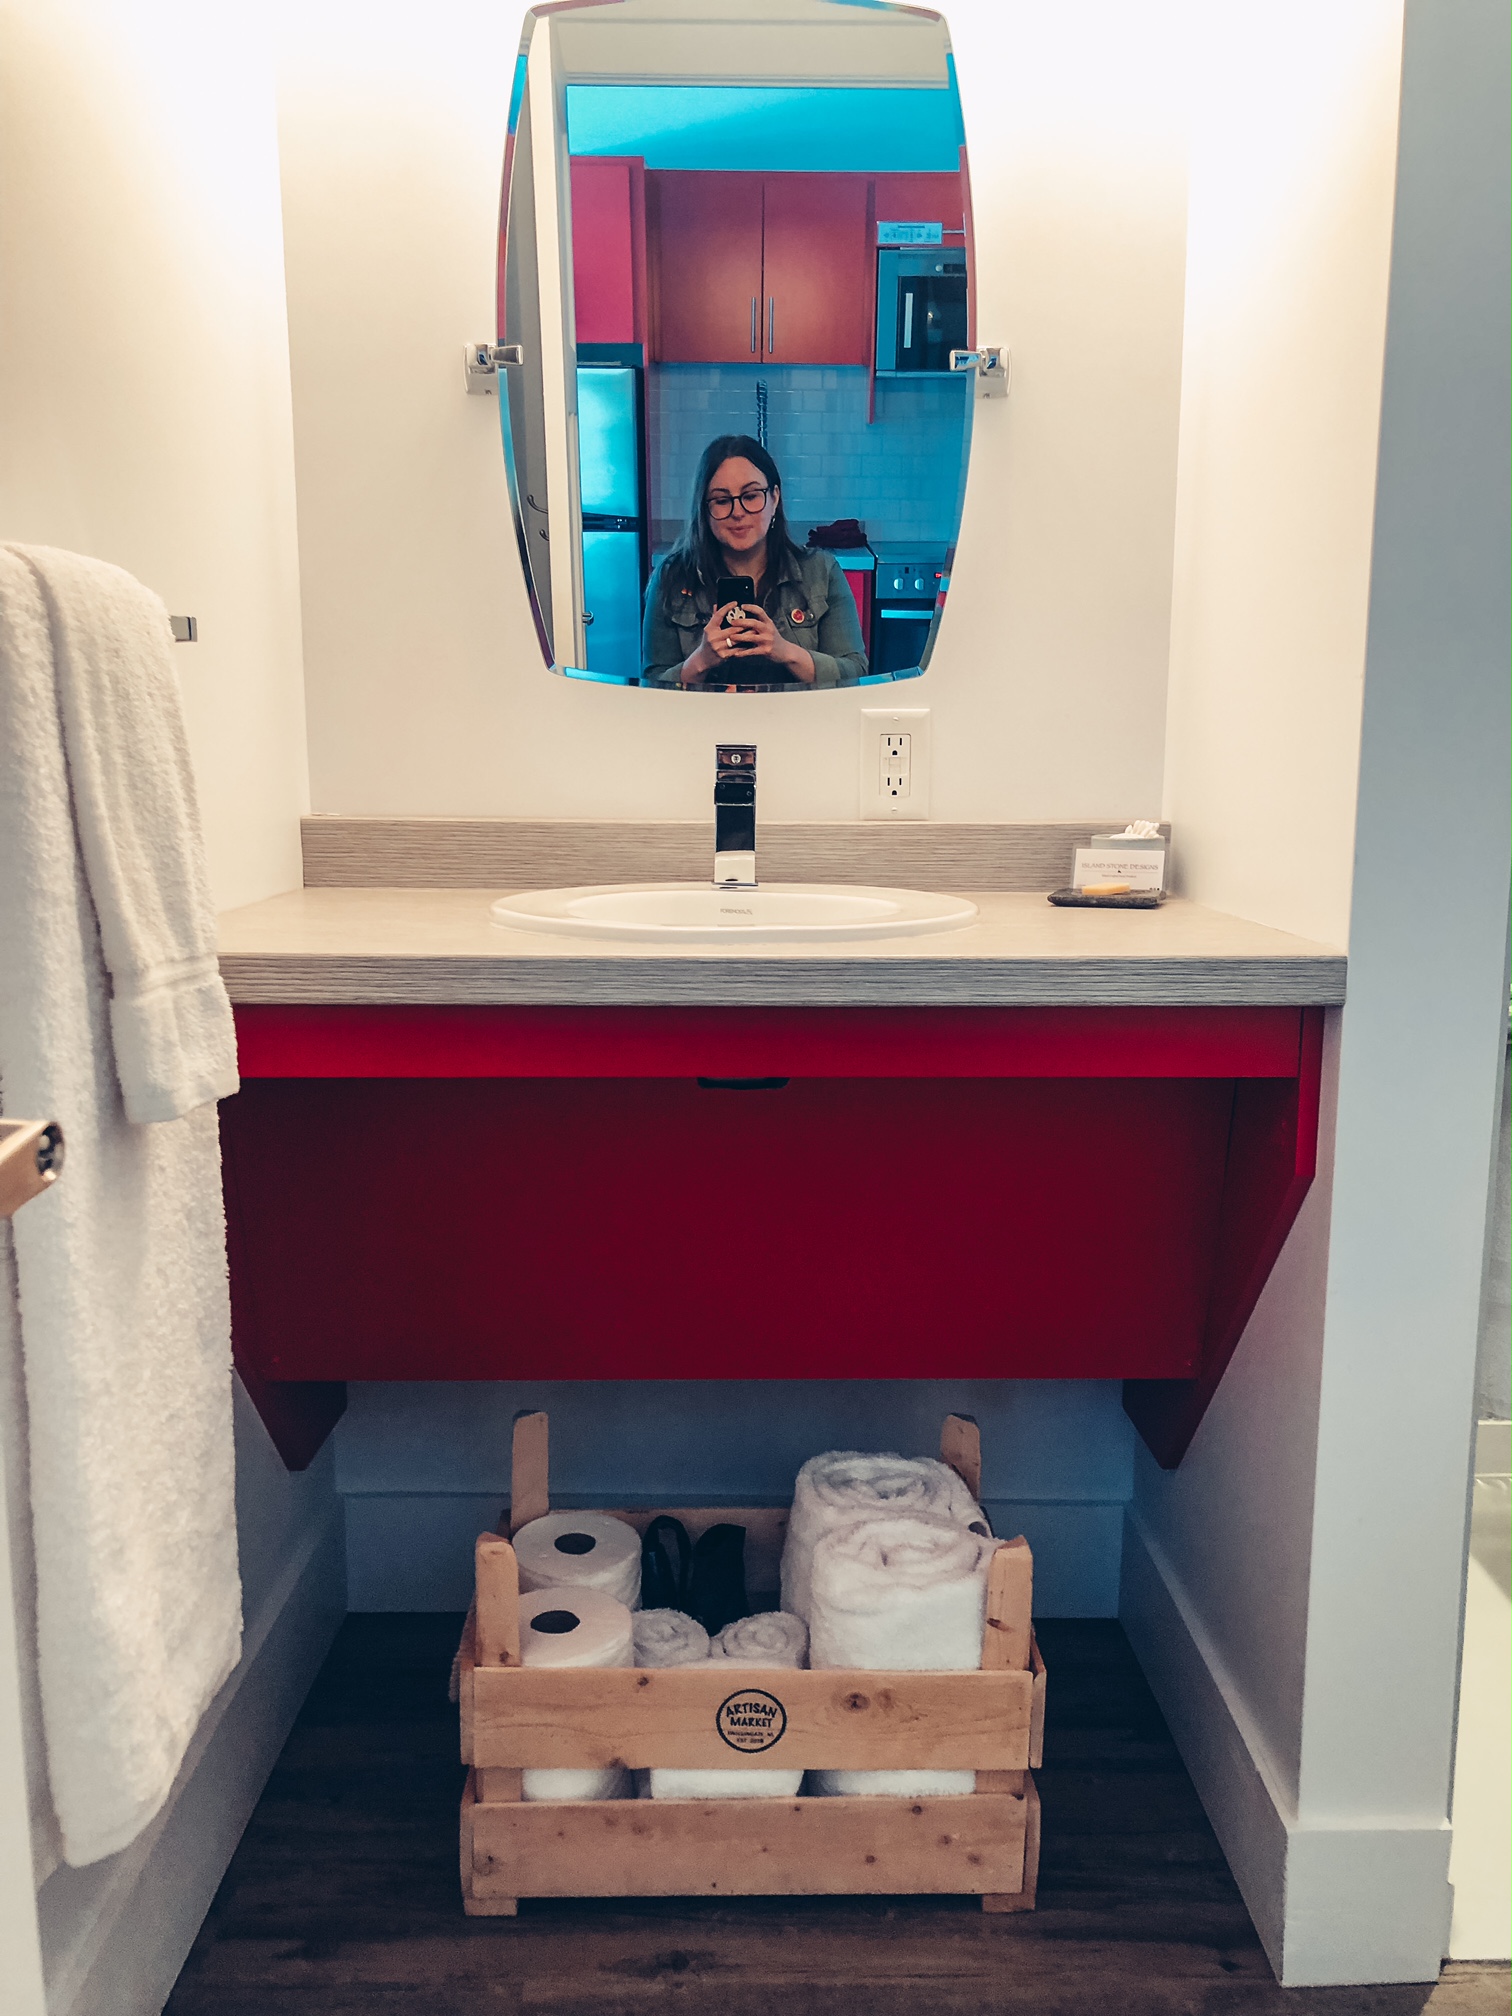 A photo of the bathroom sink and counter. There is a red counter with space to roll under it. Beneath that space is a box of toiletries that can be moved if you need access. Above the sink is a mirror which tilts up and down.